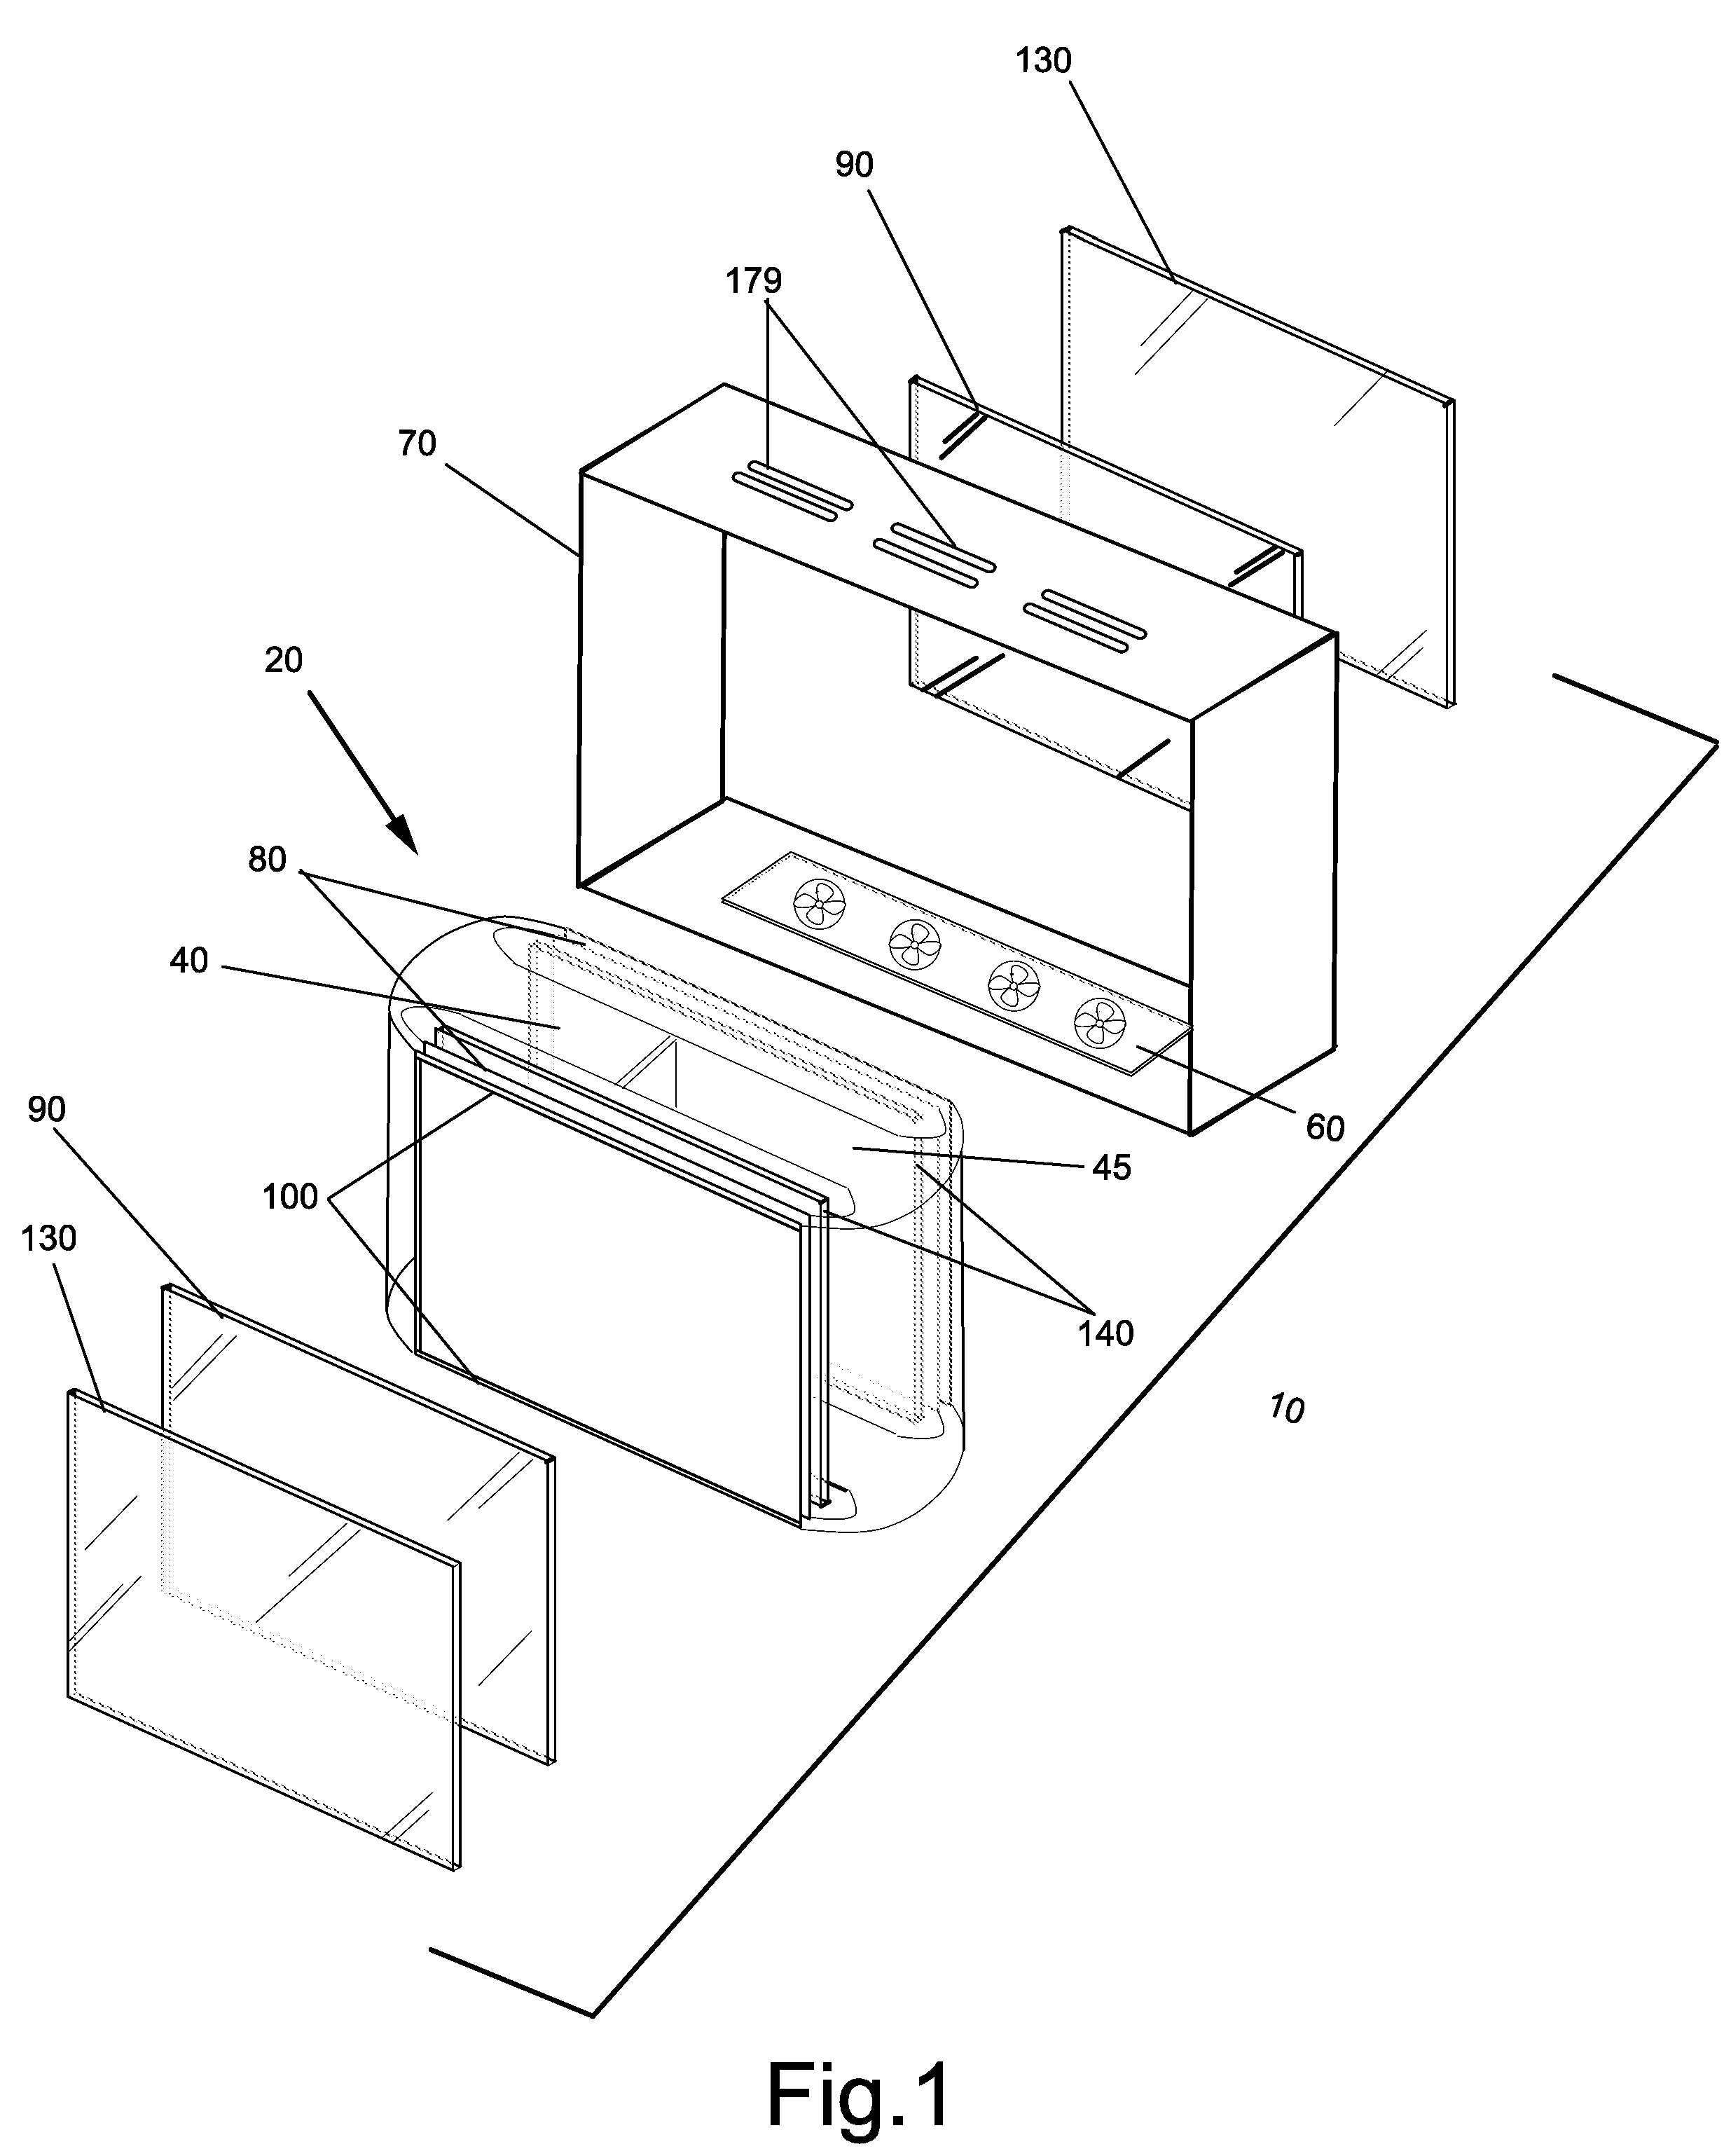 Shared Isolated Gas Cooling System for Oppositely Facing Electronic Displays